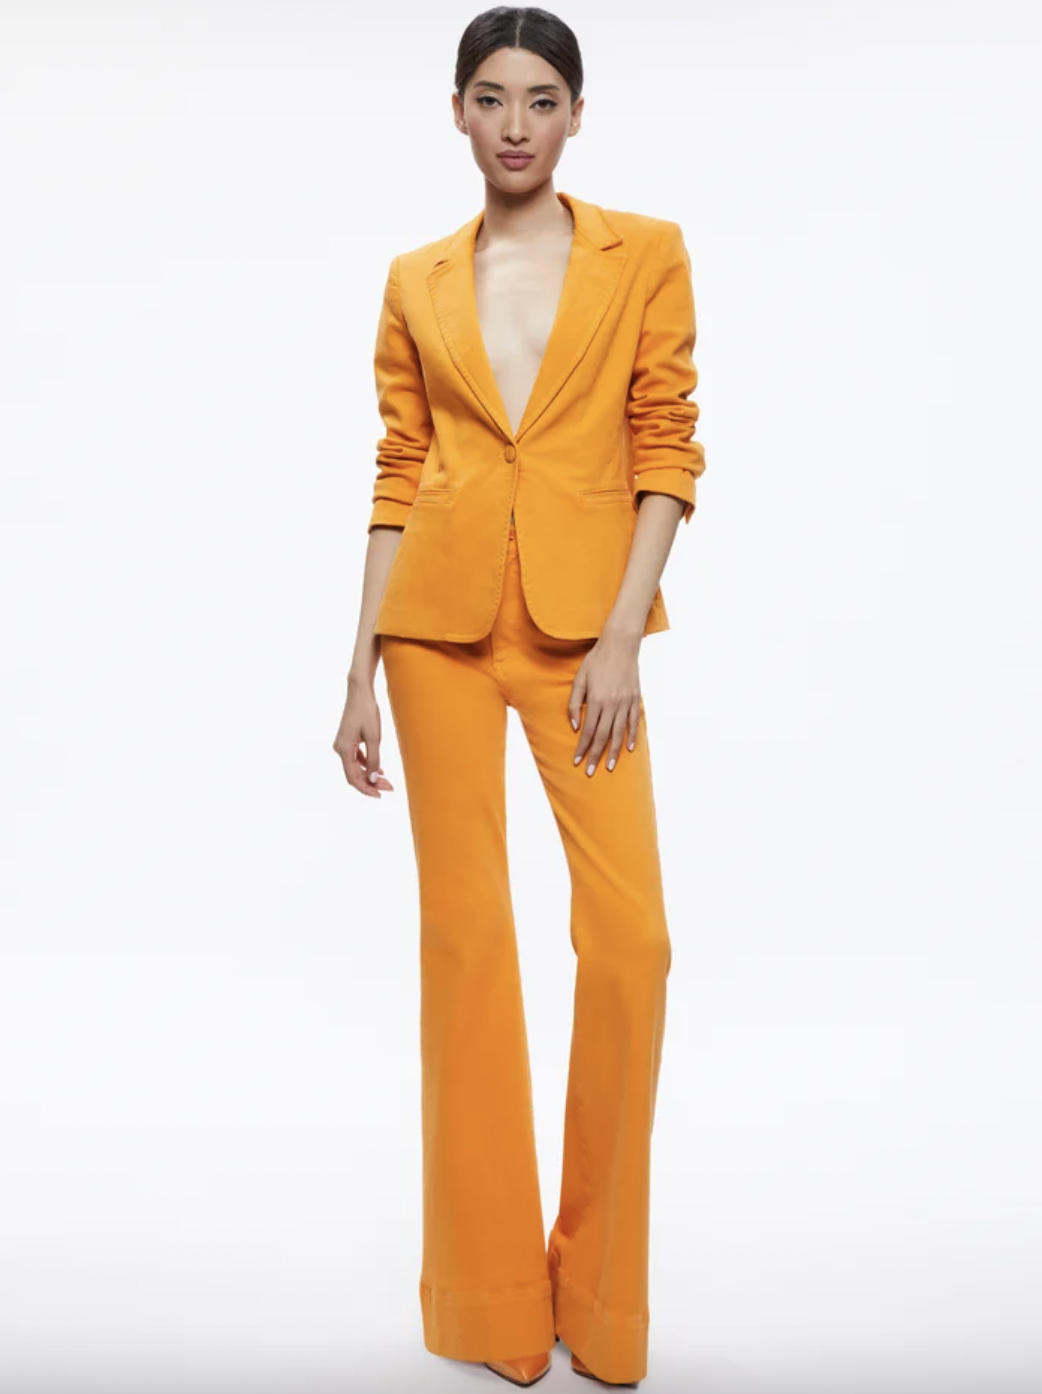 The Best Dressy Pant Suits for Wedding Guests